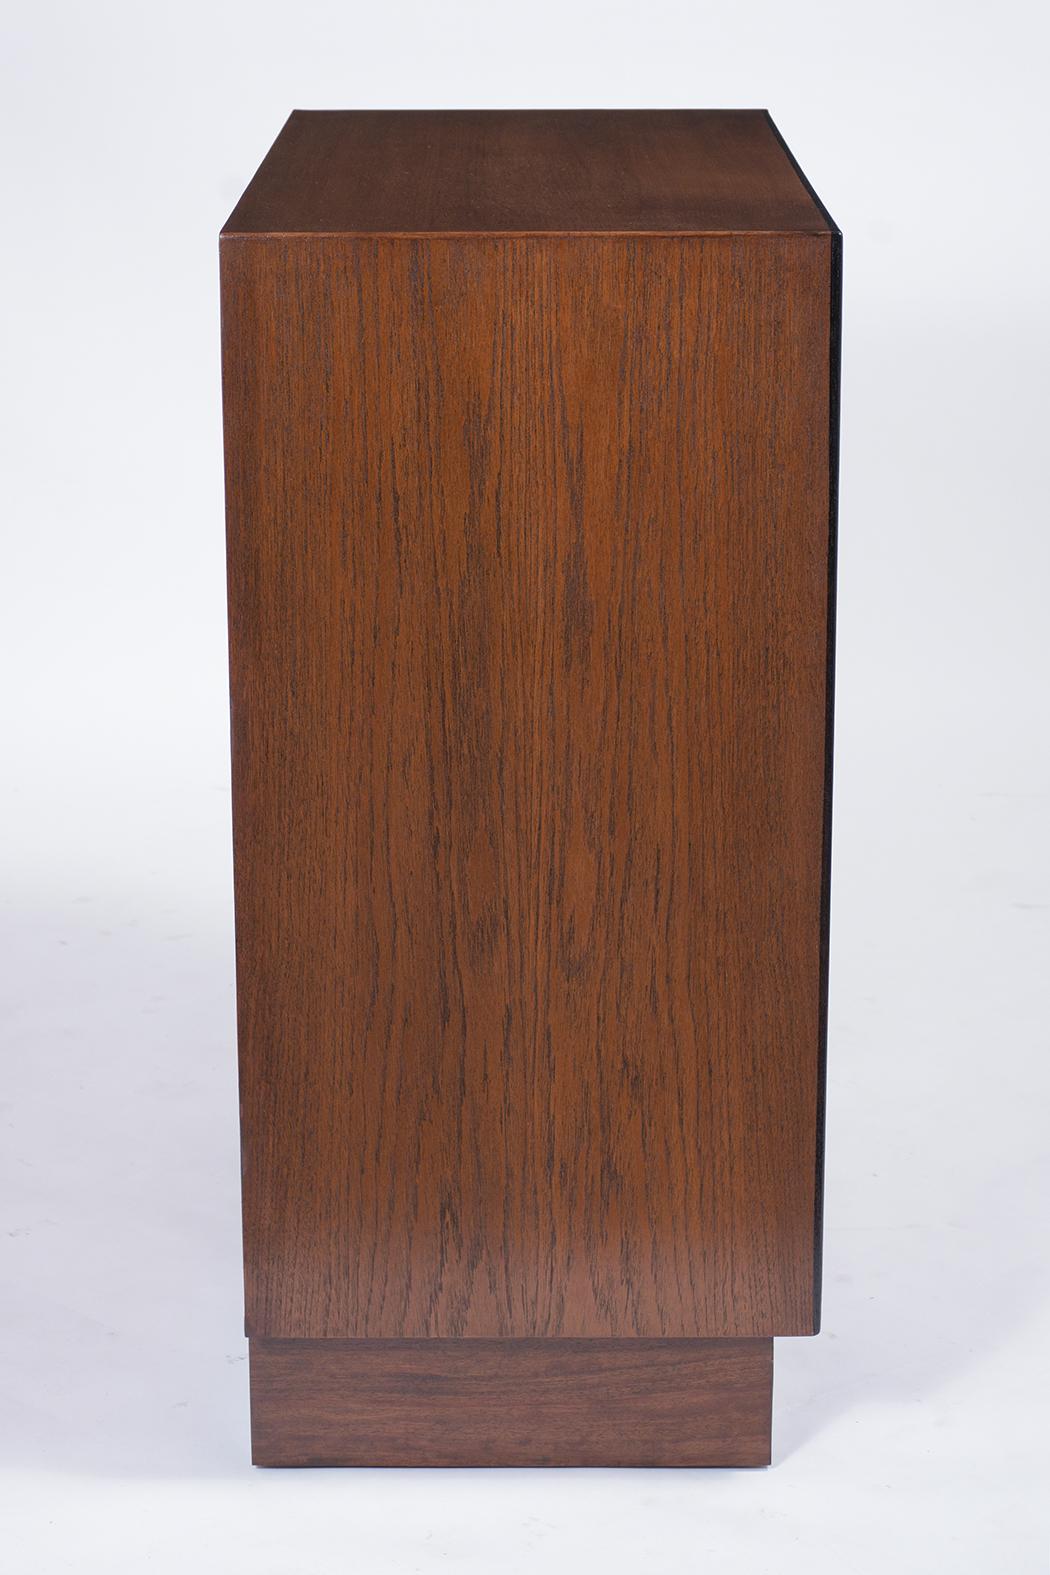 1960s Mid-Century Modern Danish Teak Wood Chest of Drawers with Ebonized Accents 4